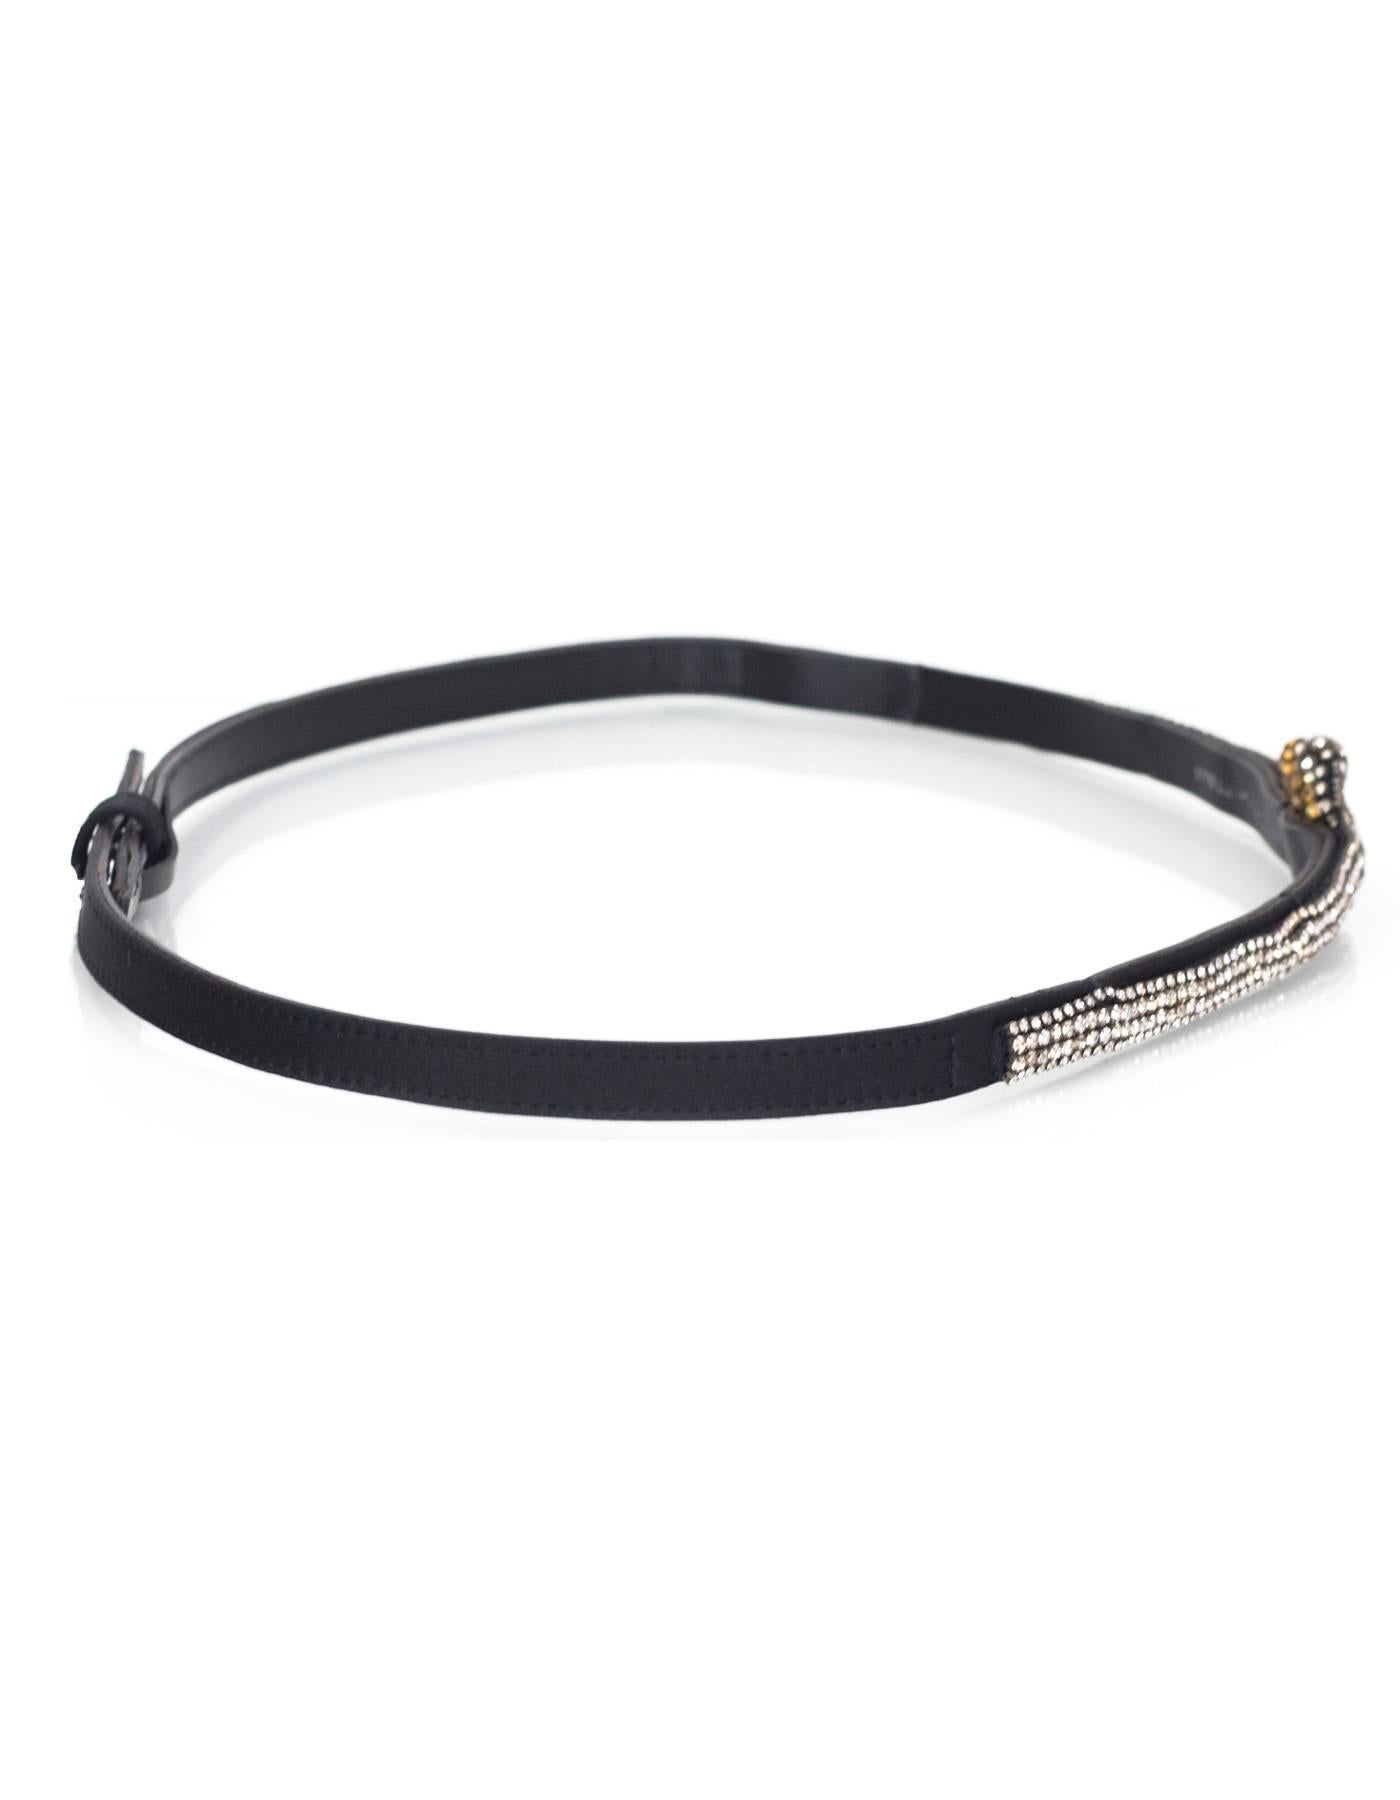 Stella McCartney Black Satin & Crystal Belt 
Features crystals that go into knot detail at center of belt

Made In: Italy
Color: Black and clear
Materials: Satin, leather and crystal
Closure/Opening: Triple snap closure
Overall Condition: Very